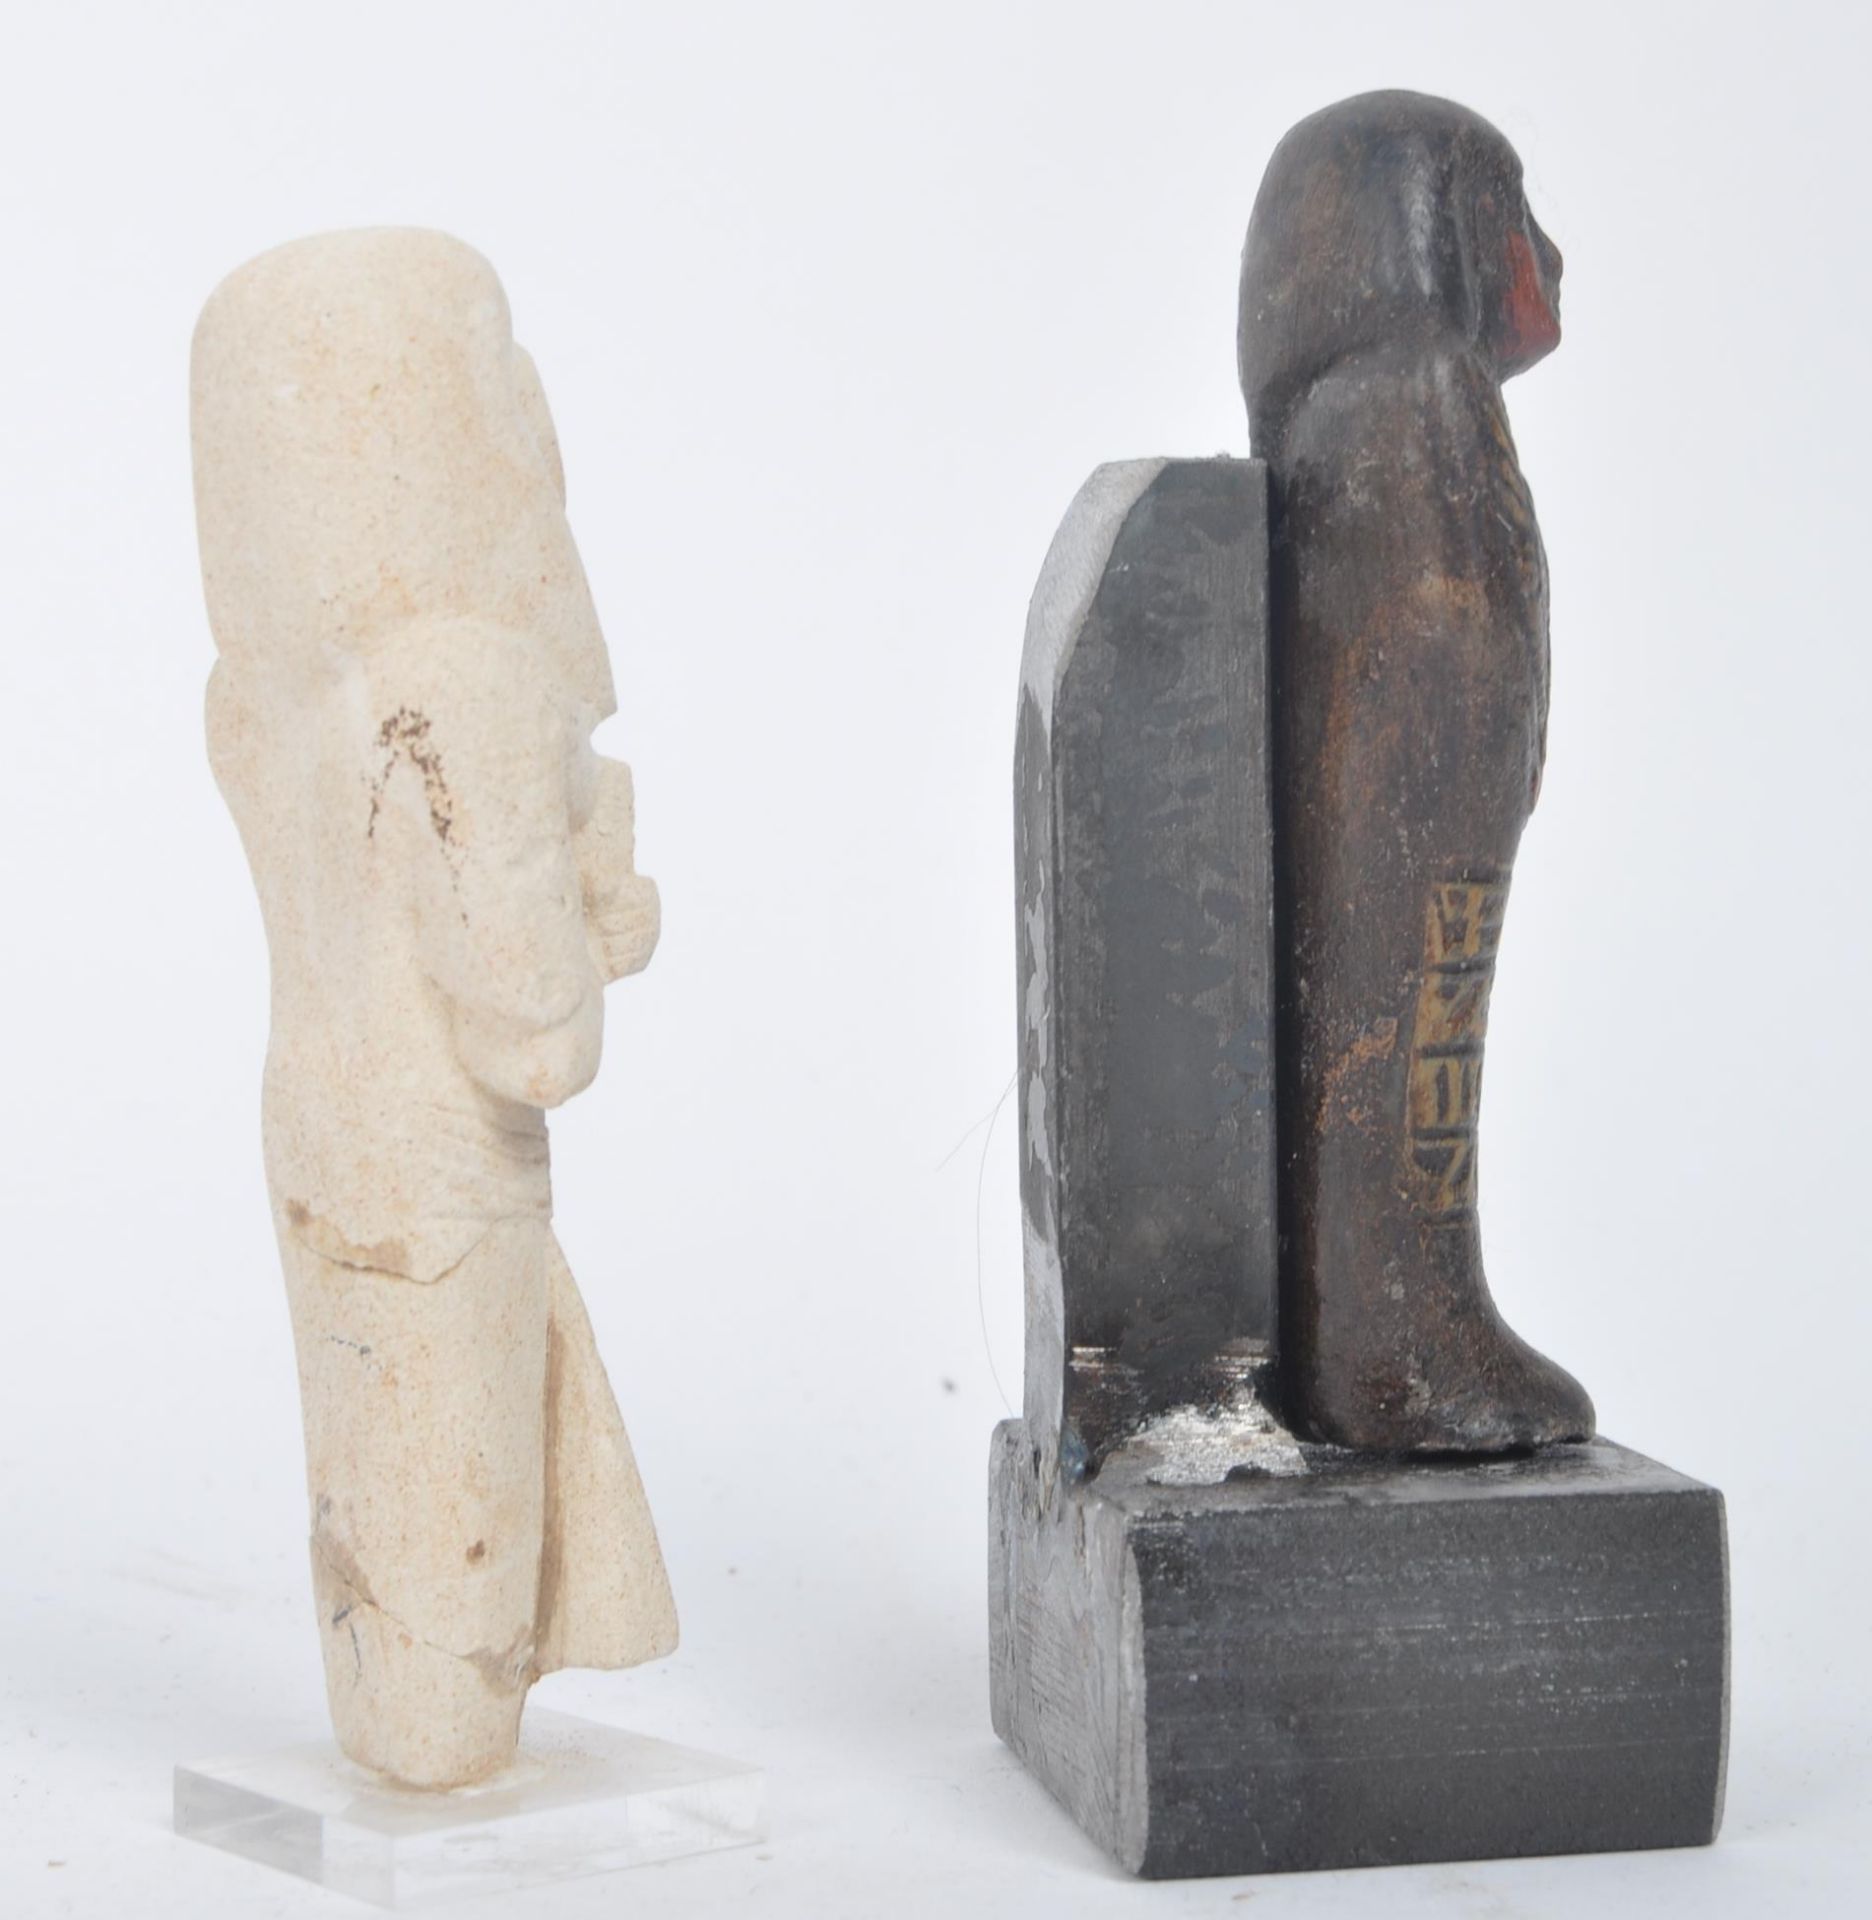 TWO ANCIENT EGYPTIAN USHABTI FUNERAL STATUETTES - Image 6 of 6